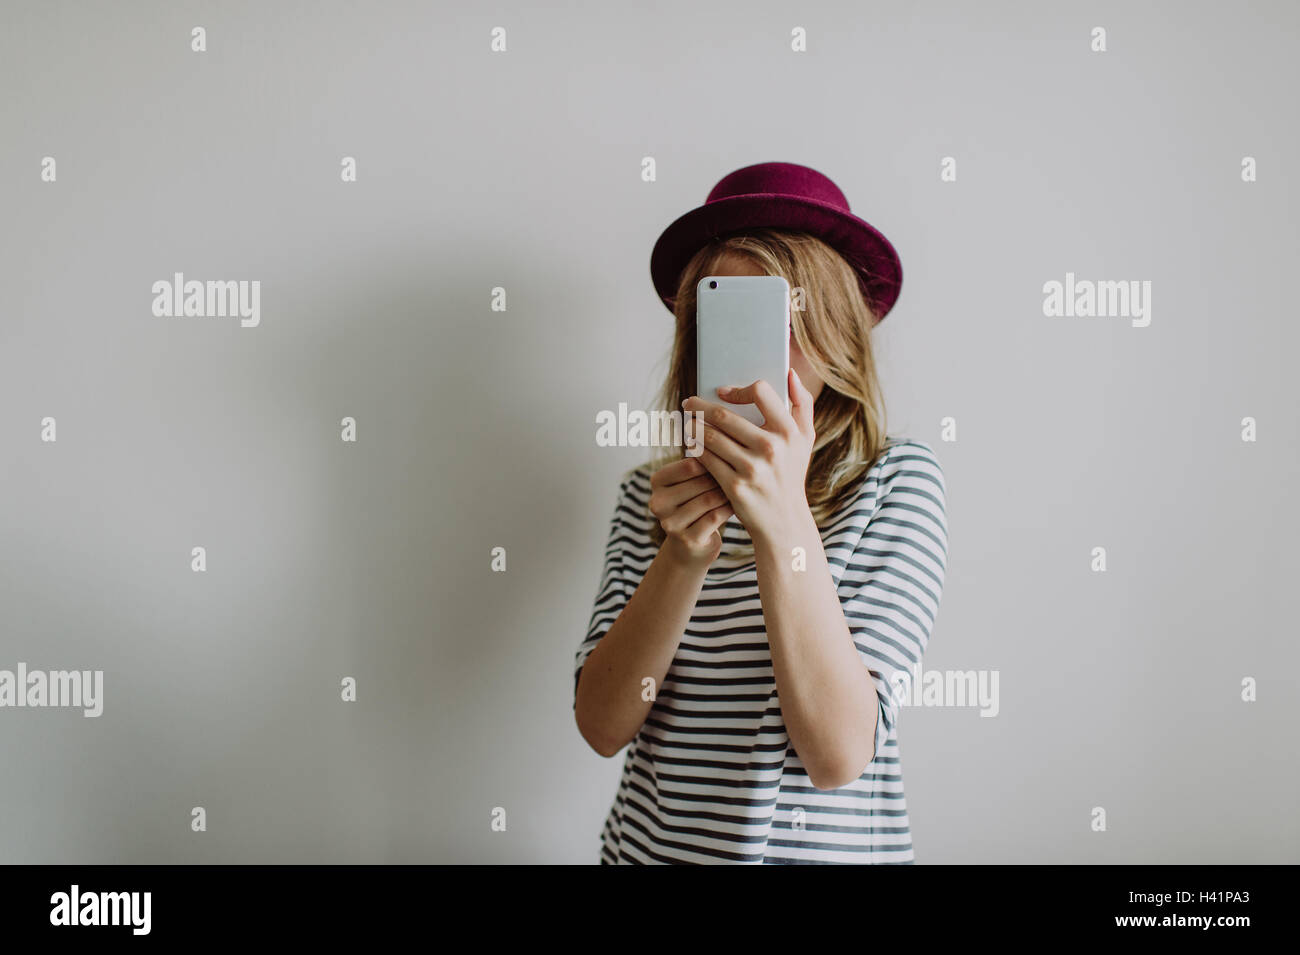 Woman taking a selfie on her phone Stock Photo